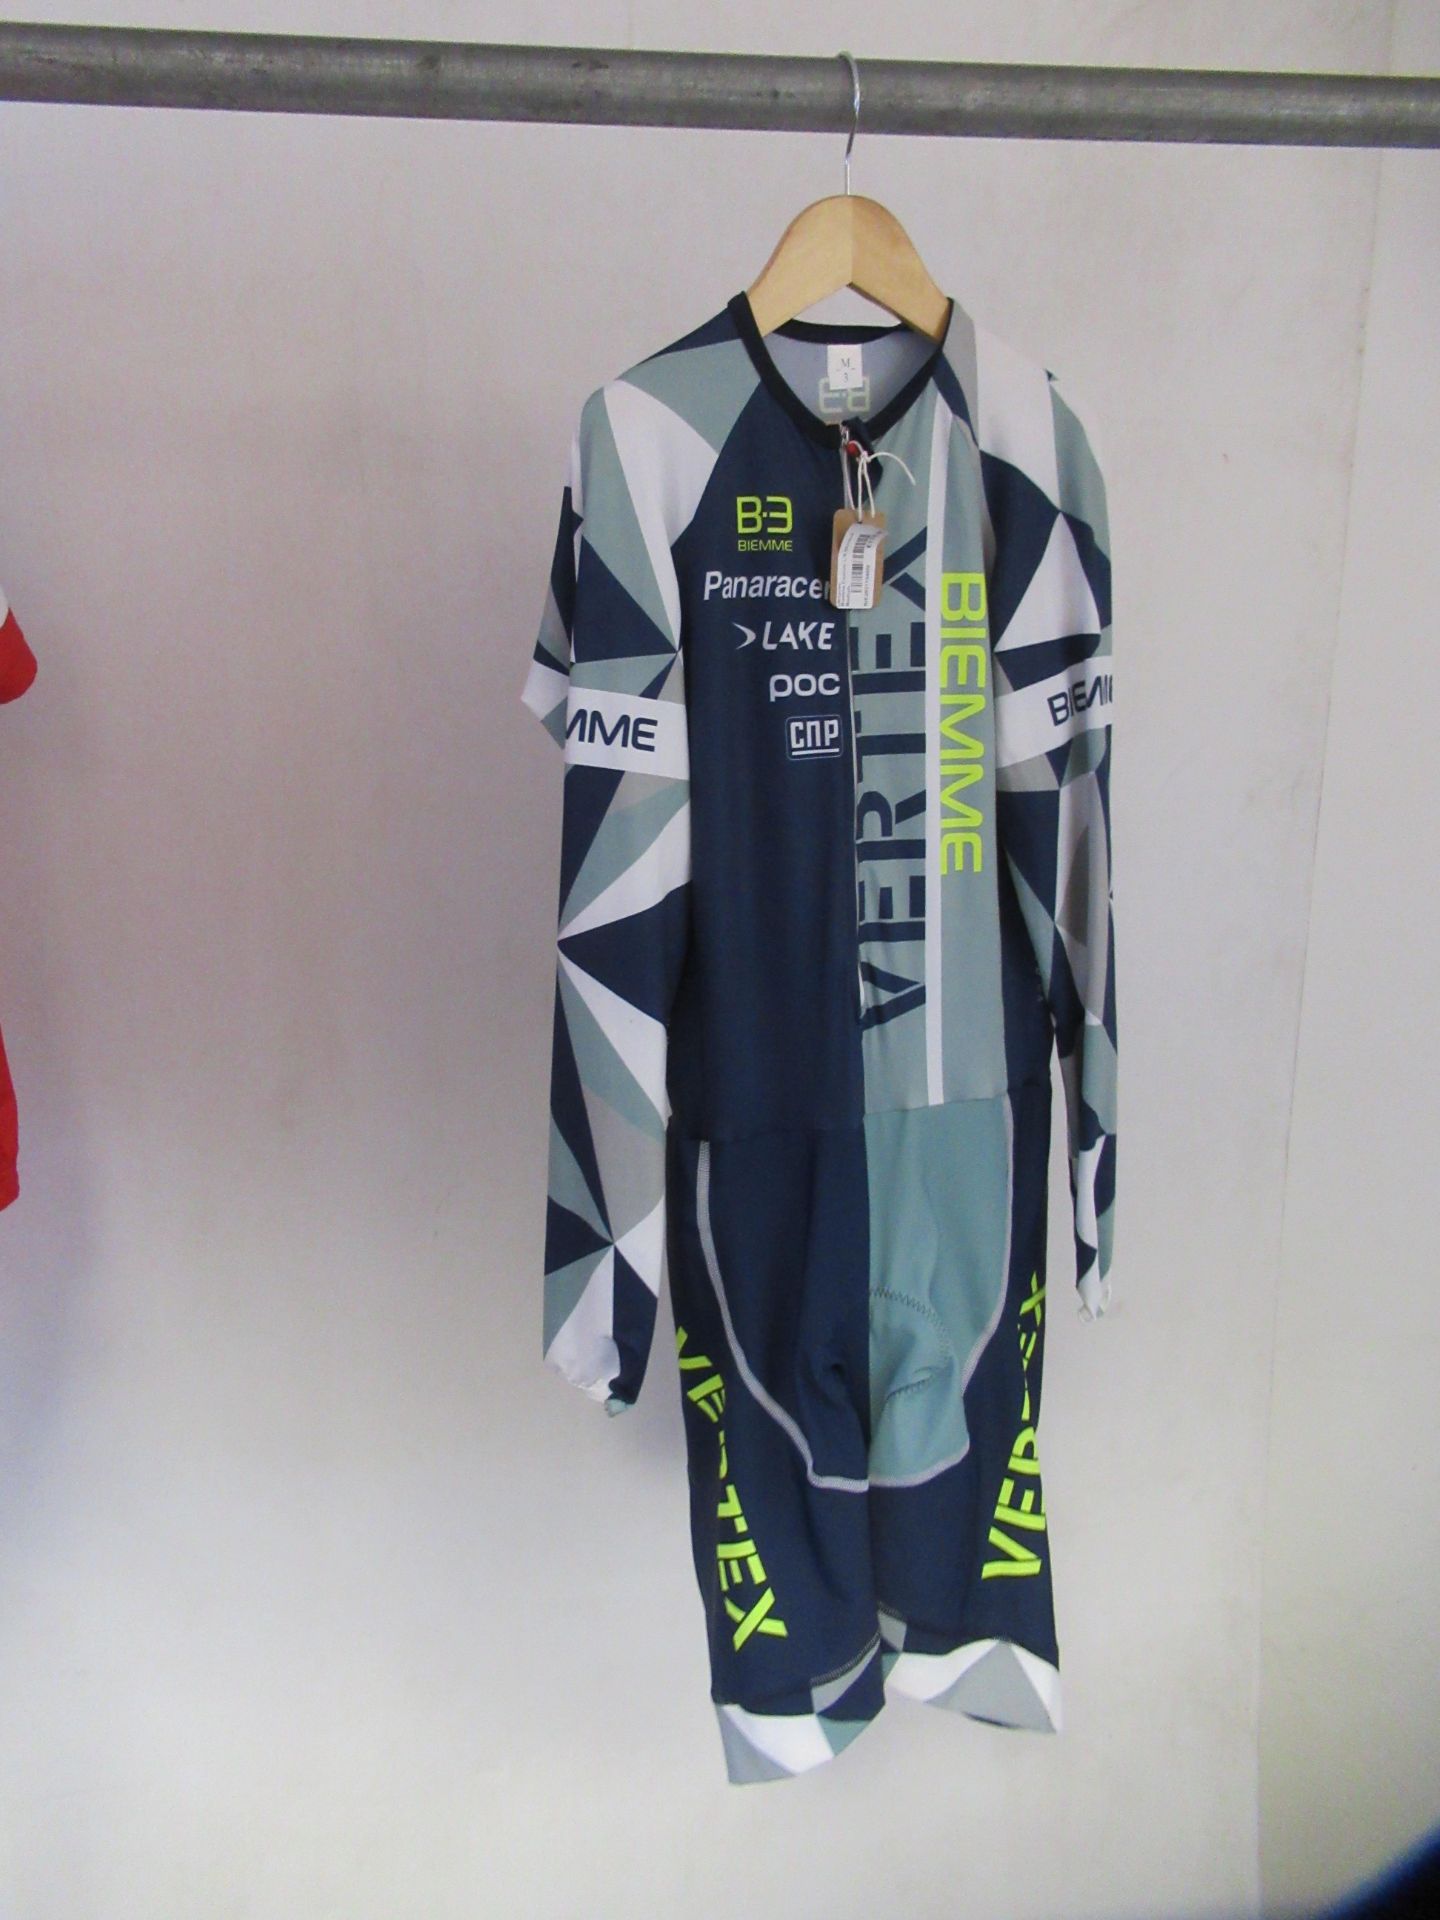 M Biemme Male Cycling Clothes - Image 8 of 8